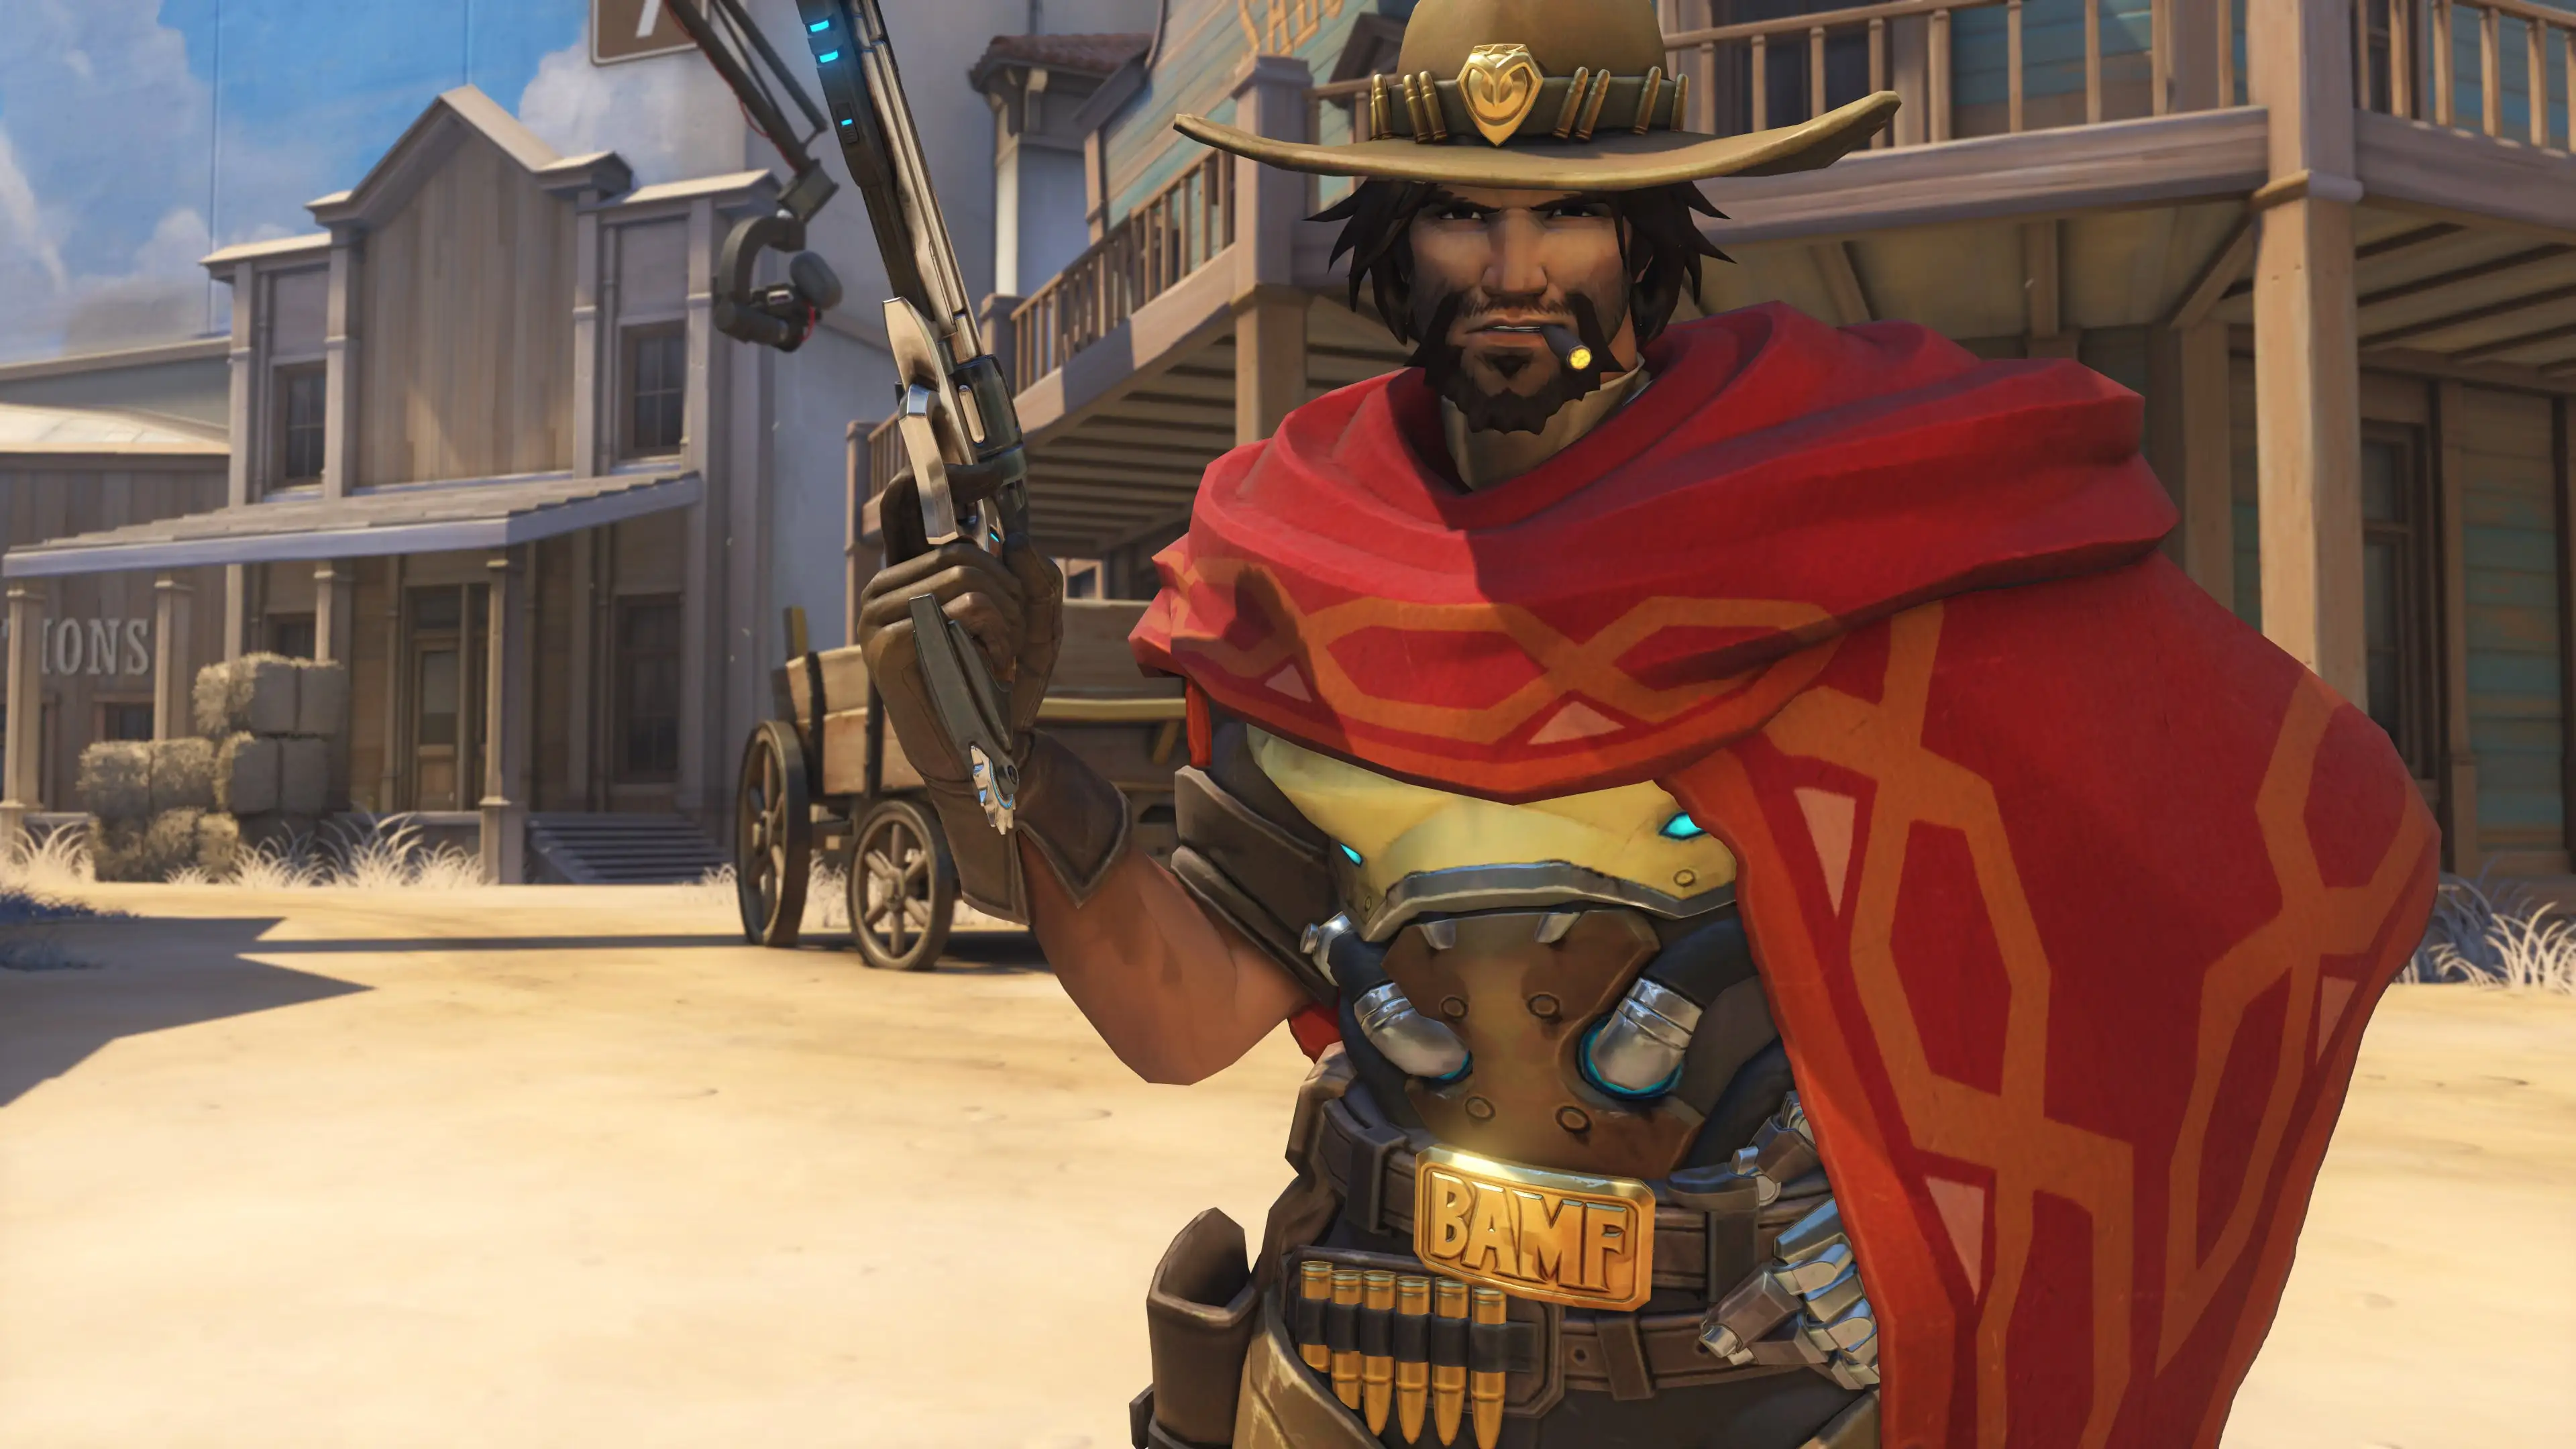 Overwatch hero McCree in a seemingly Wild West setting.